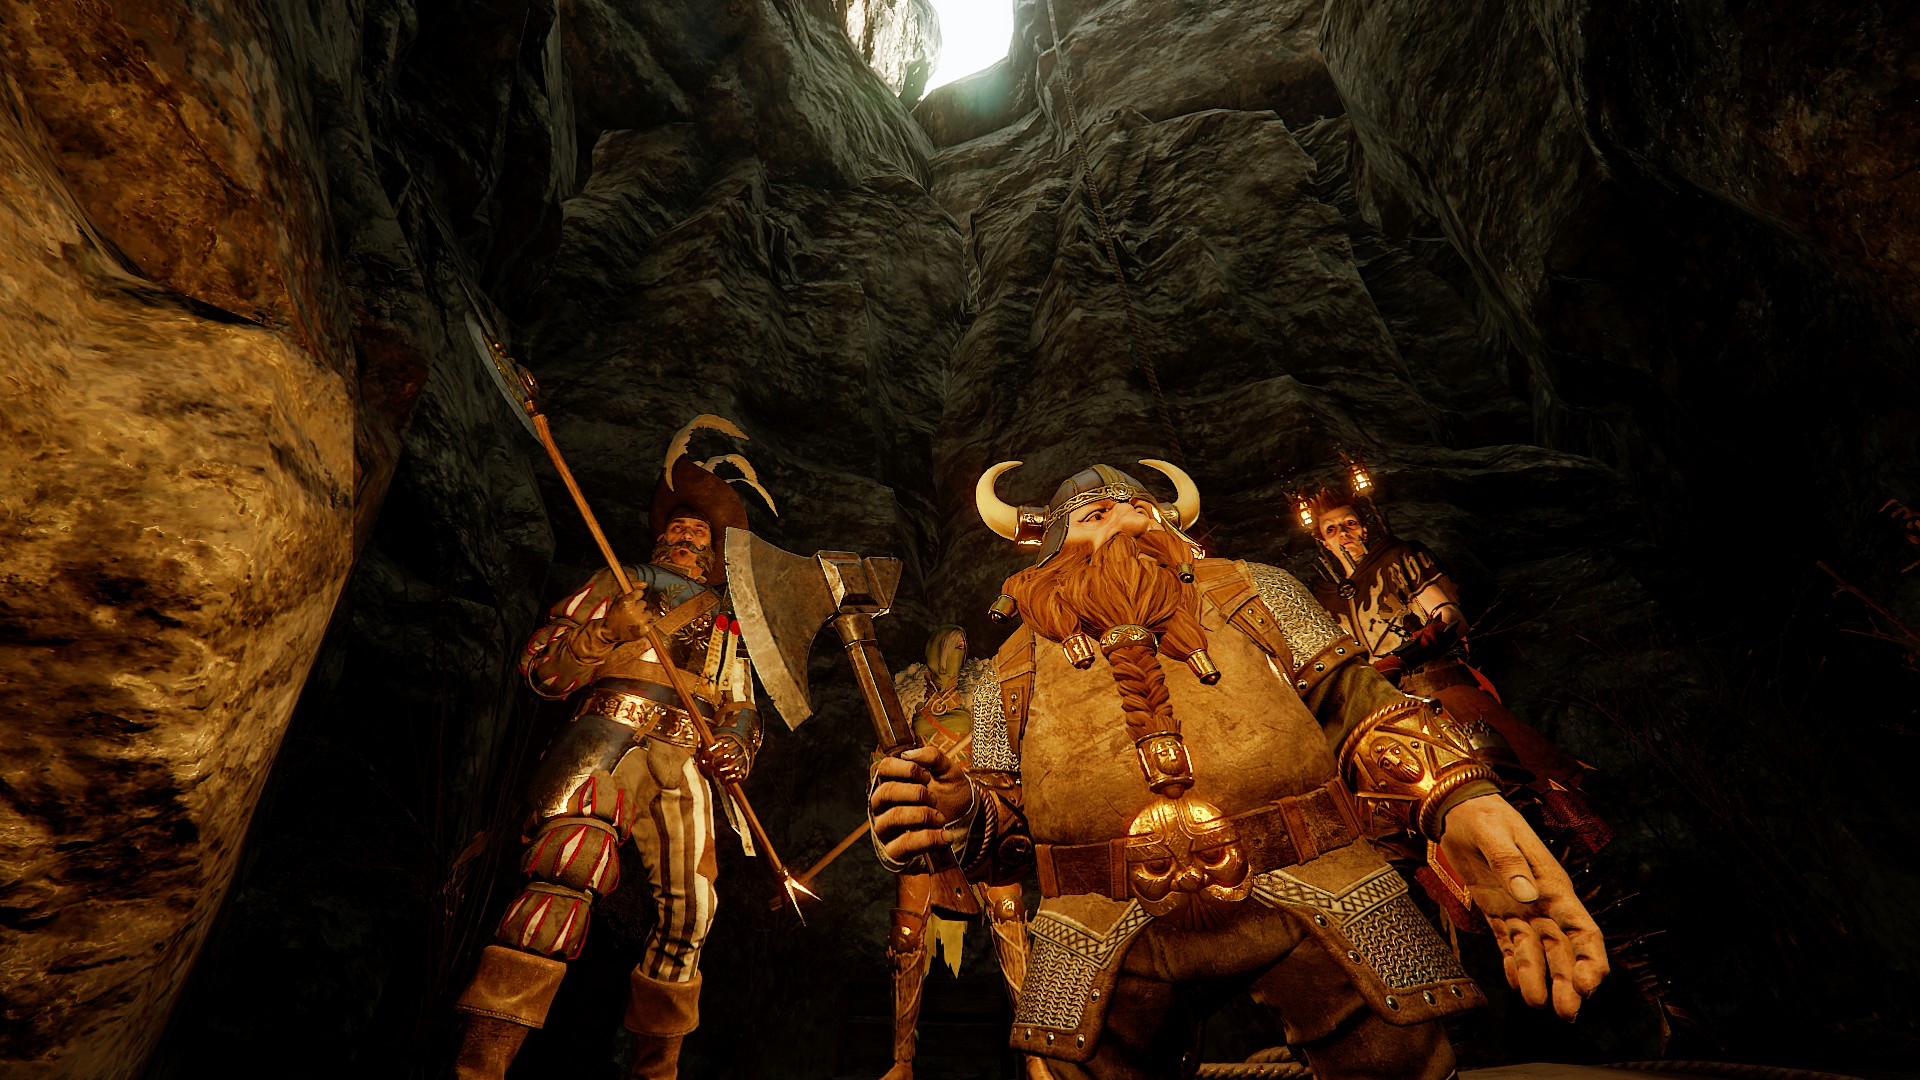 Best co-op games - Warhammer: Vermintide 2 - A party of four players stands together with weapons drawn.